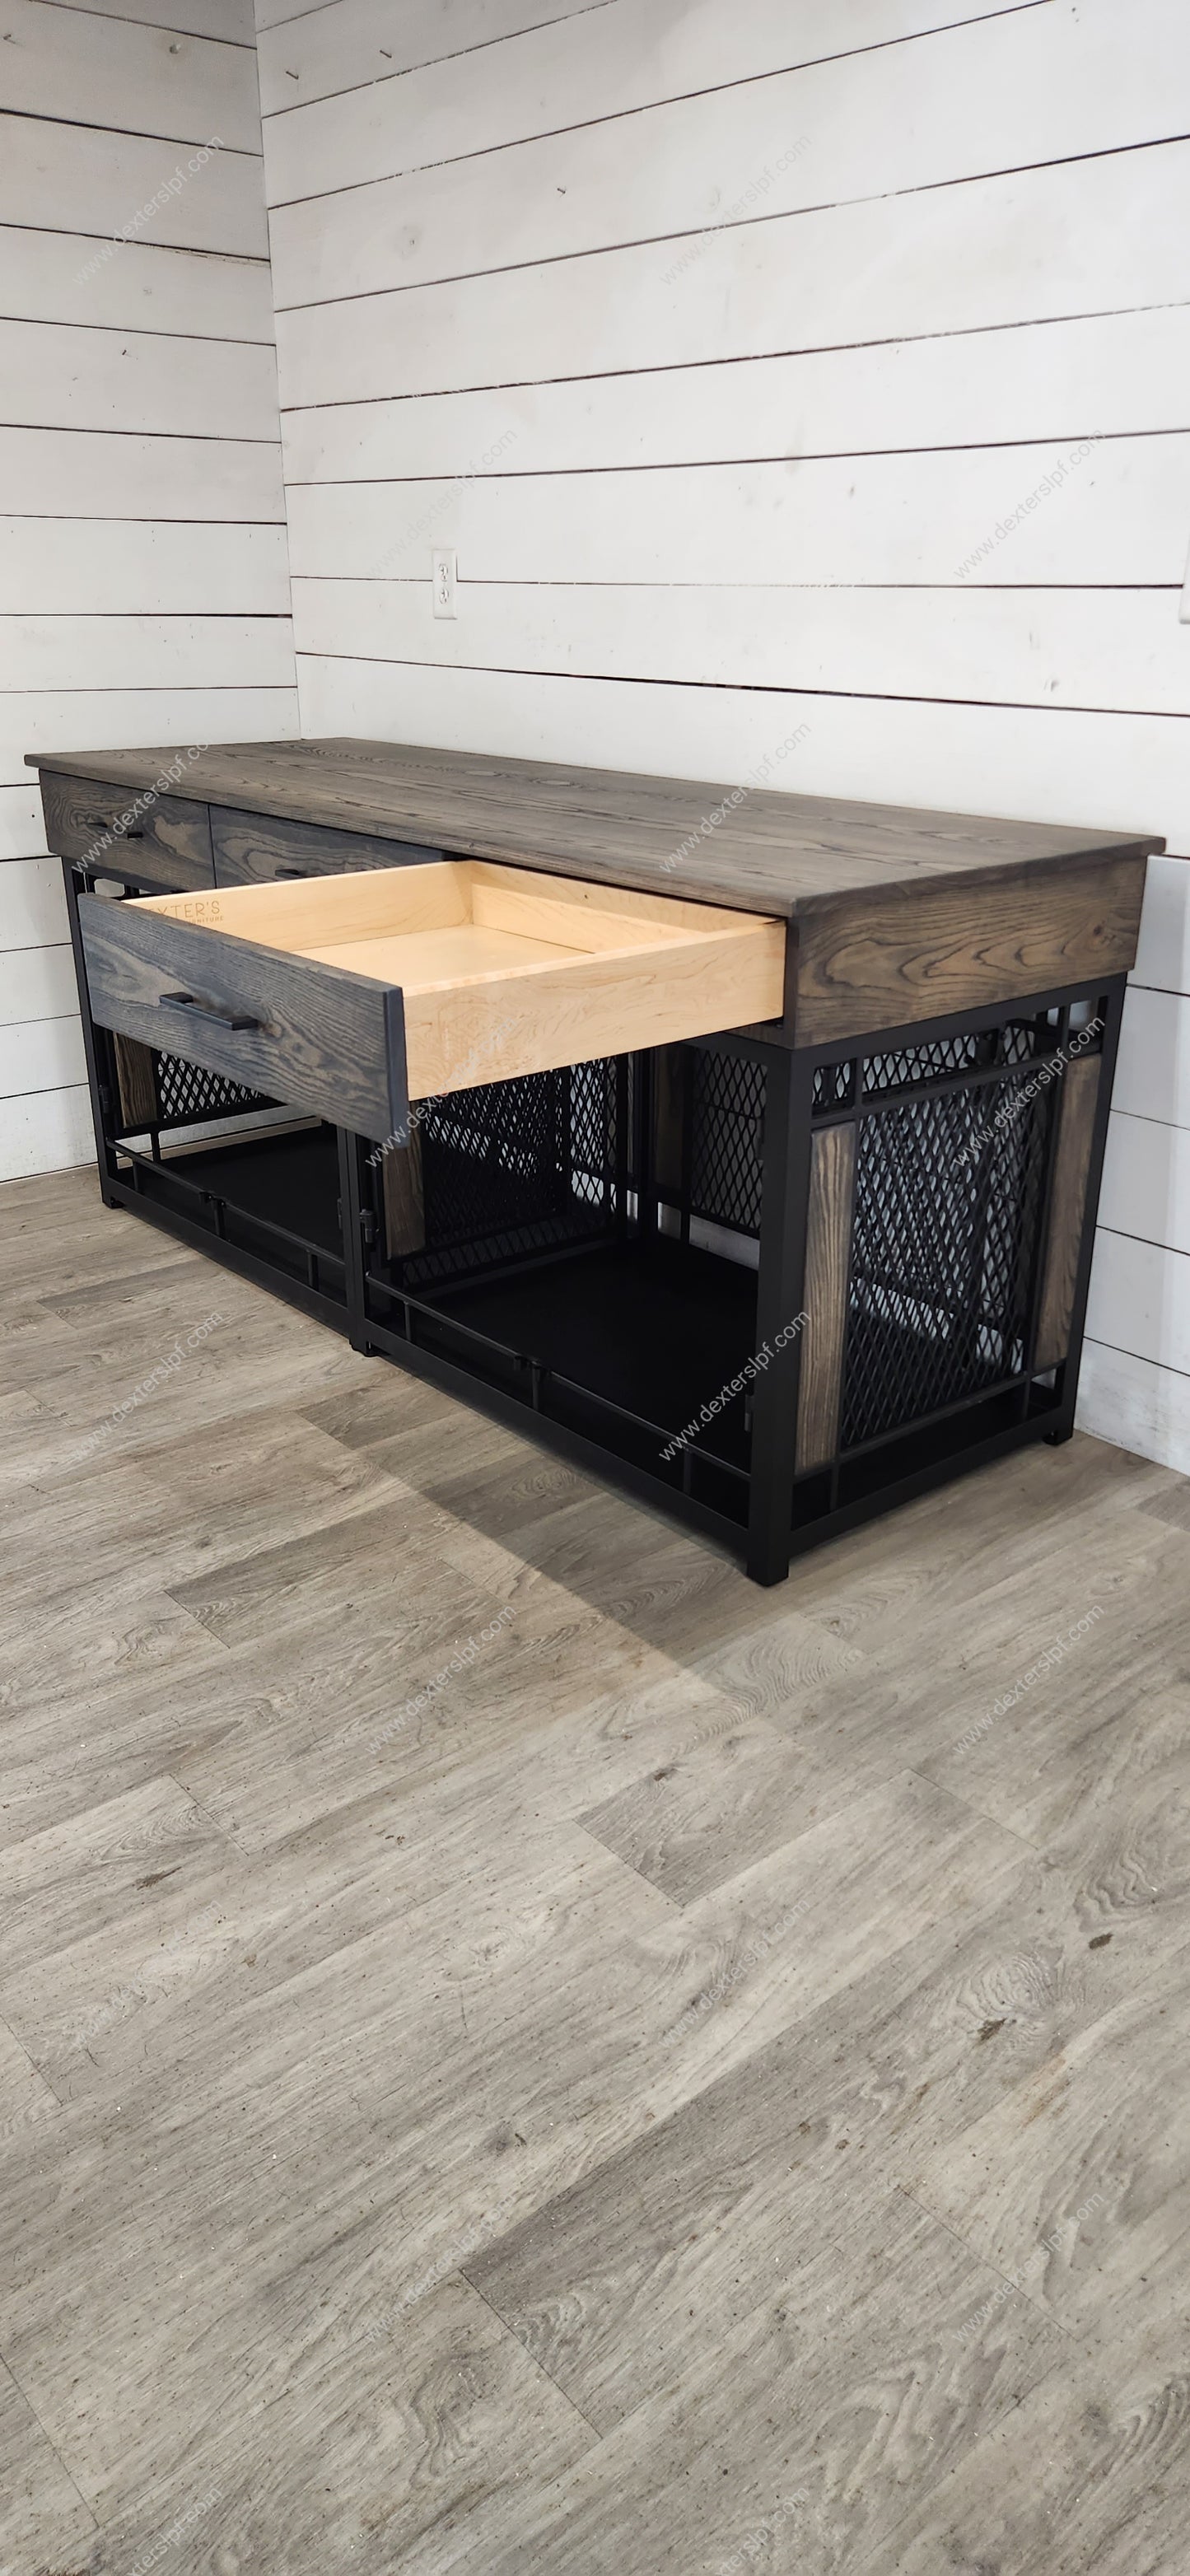 Raven Large Double Dog Kennel, 3 Drawers